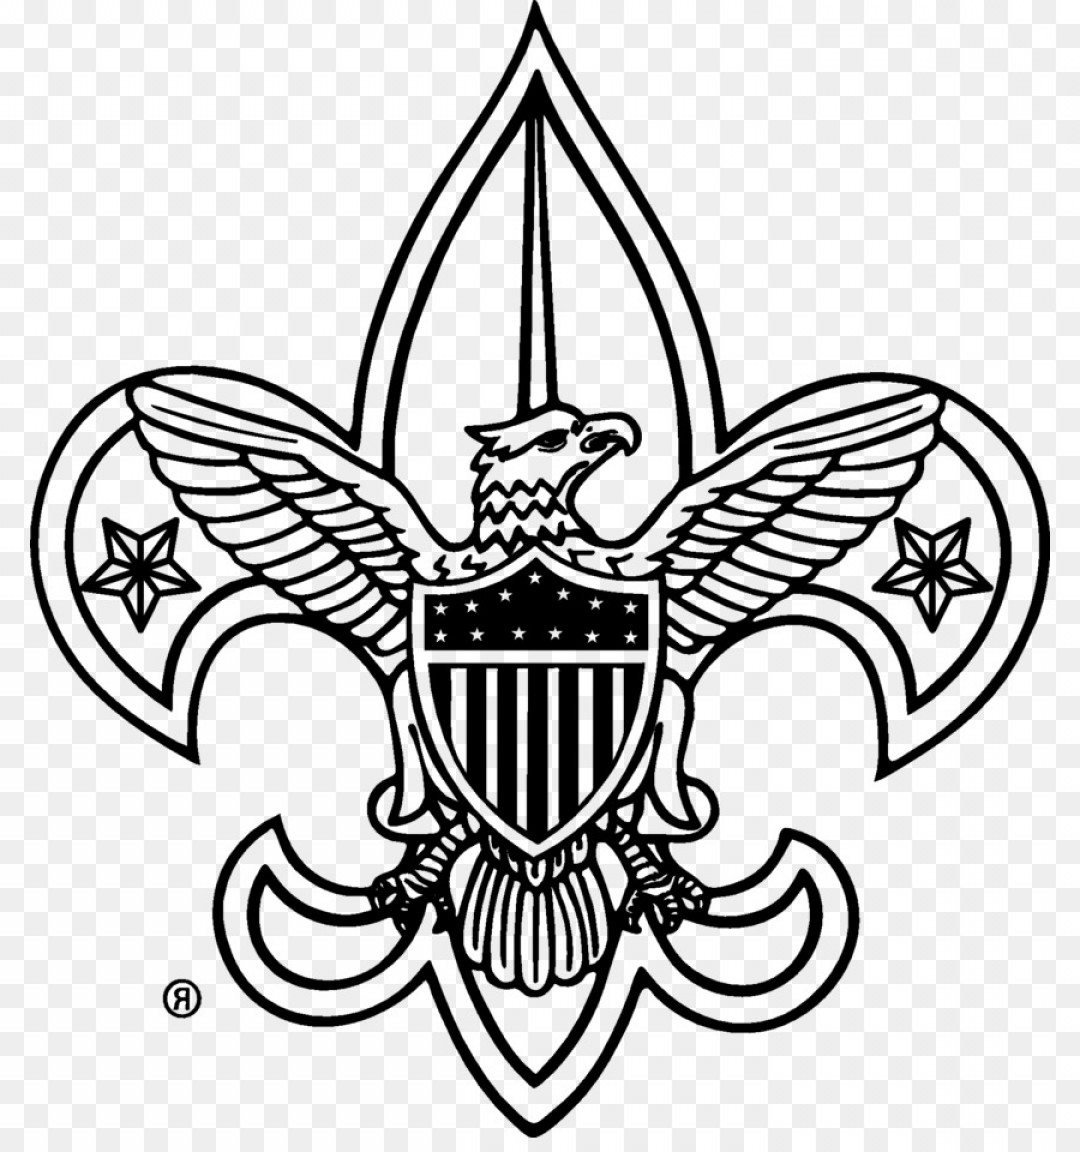 Download Boy Scout Logo Vector at Vectorified.com | Collection of ...